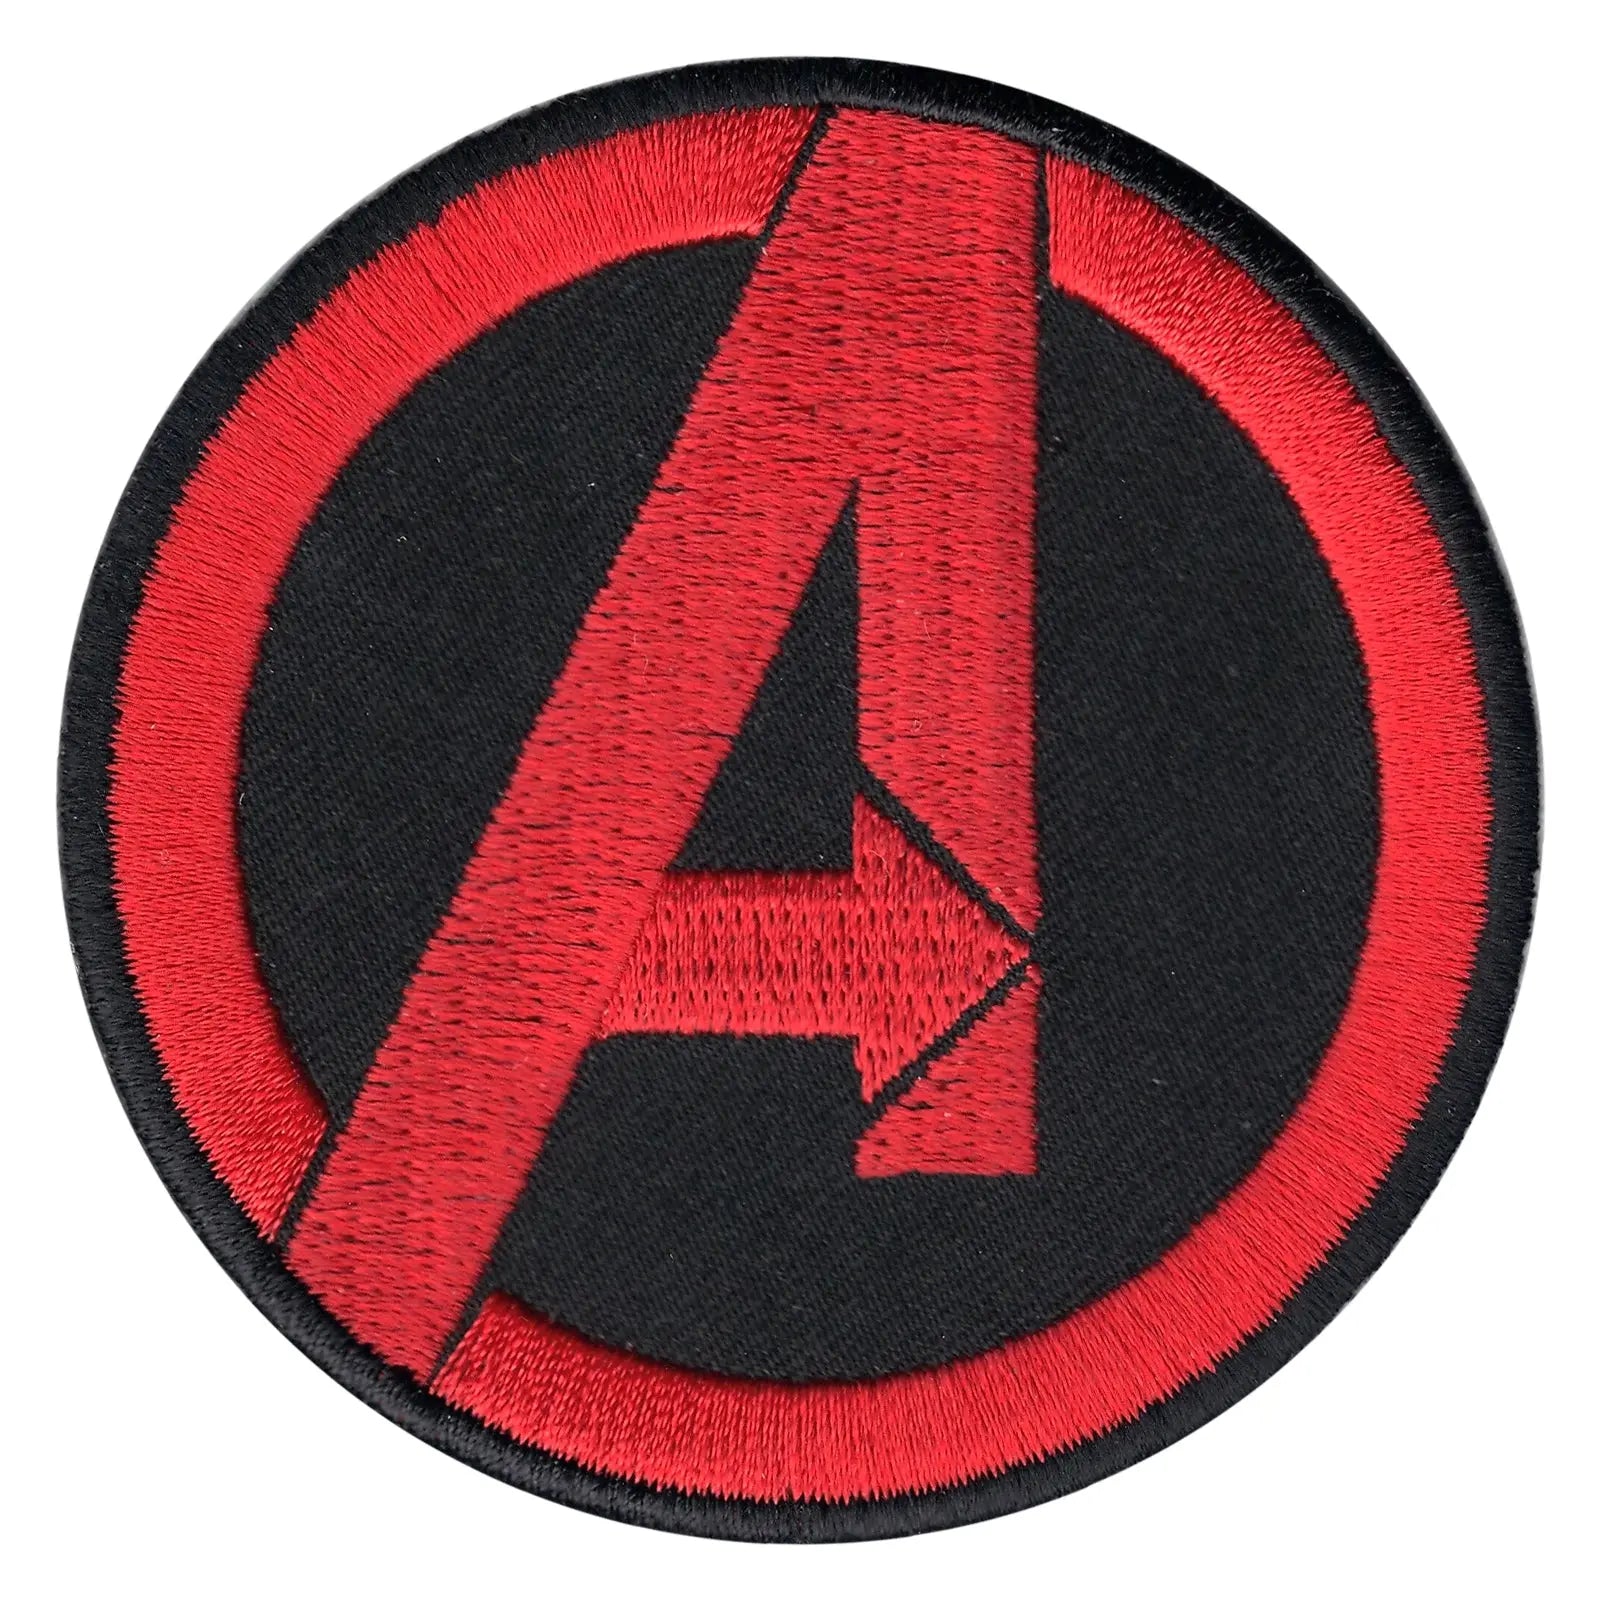 The Avengers Classic 'A' Logo Iron on Patch 